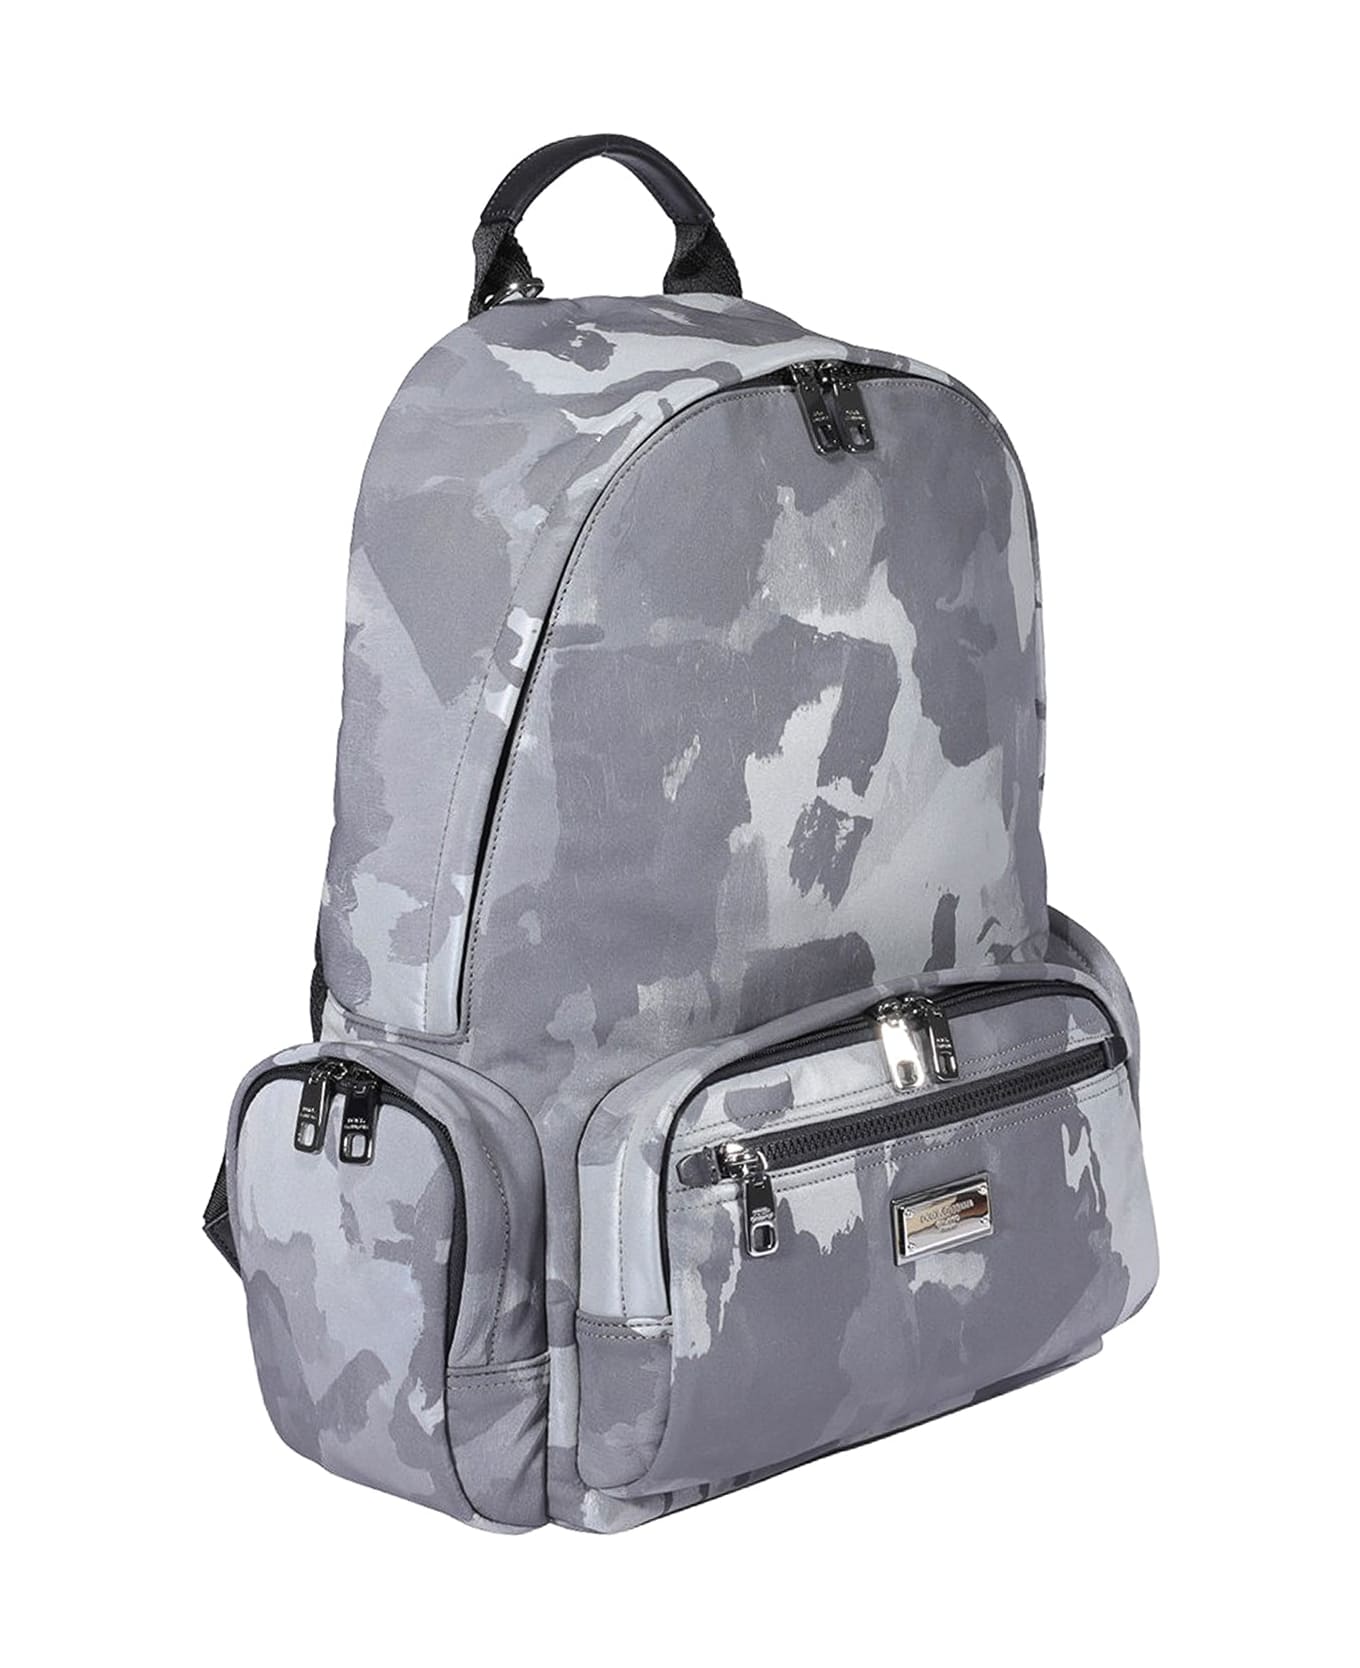 Dolce & Gabbana Camouflage Backpack - Gray